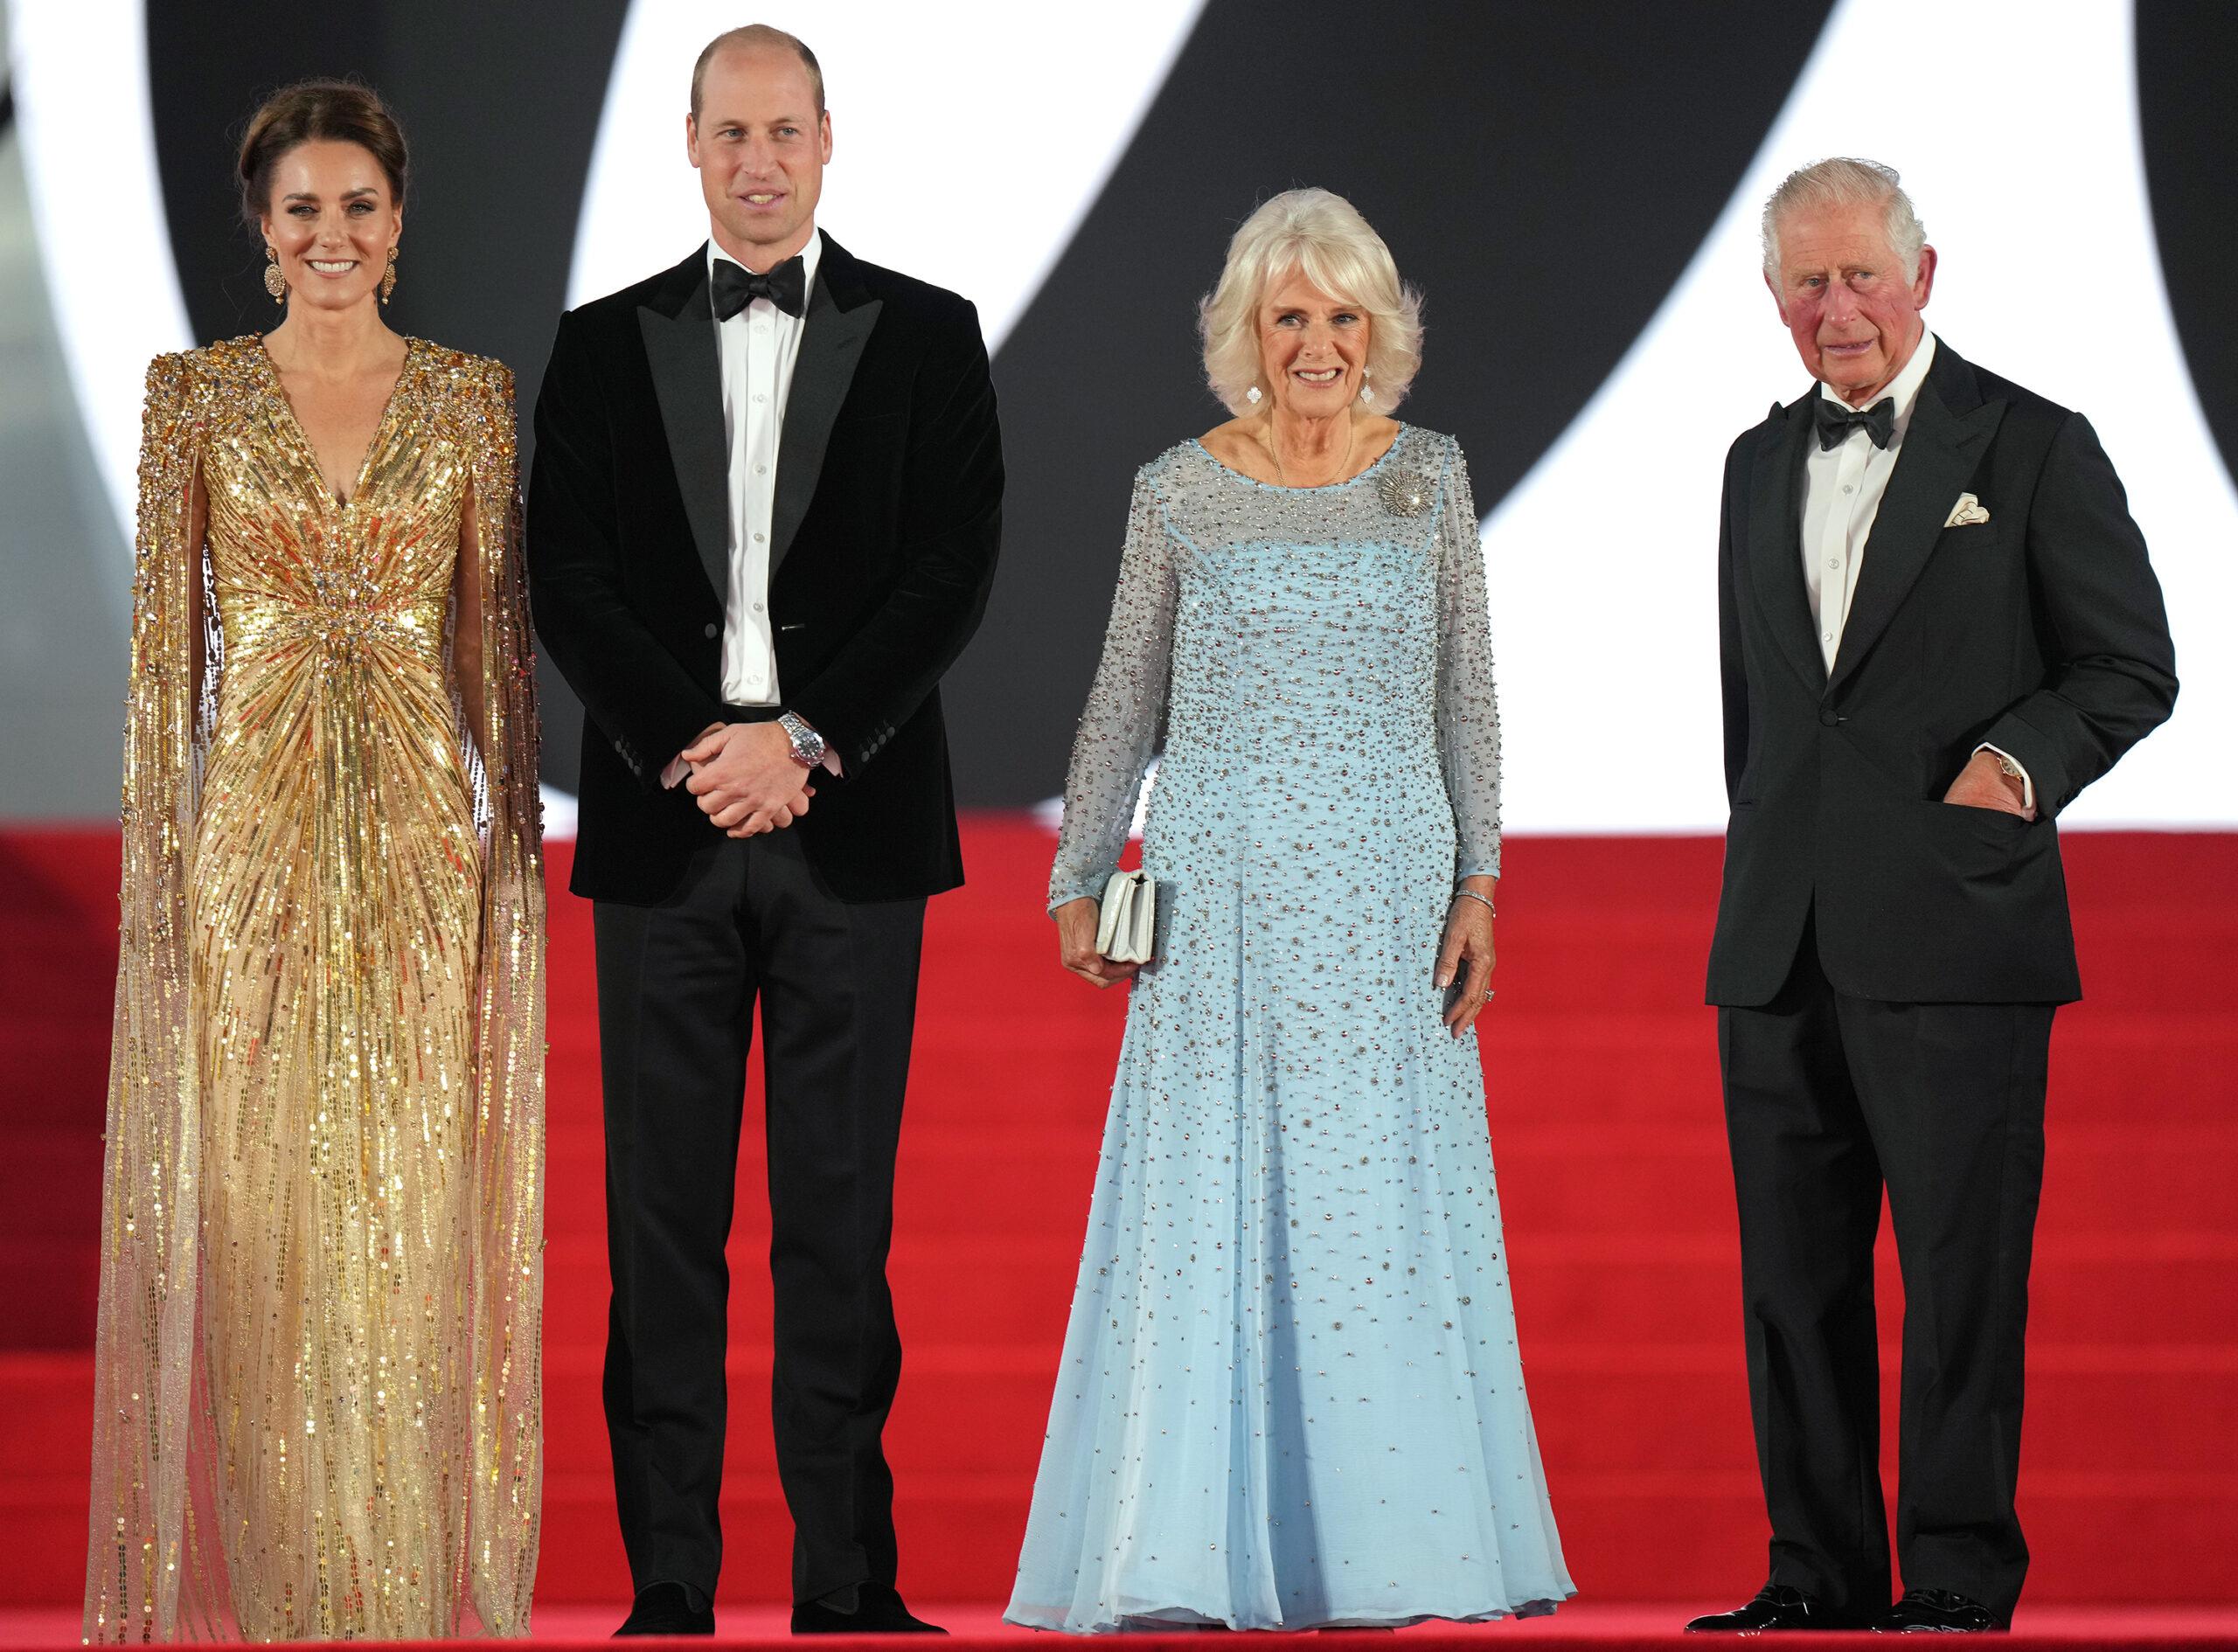 Prince Charles with Duchess Camilla